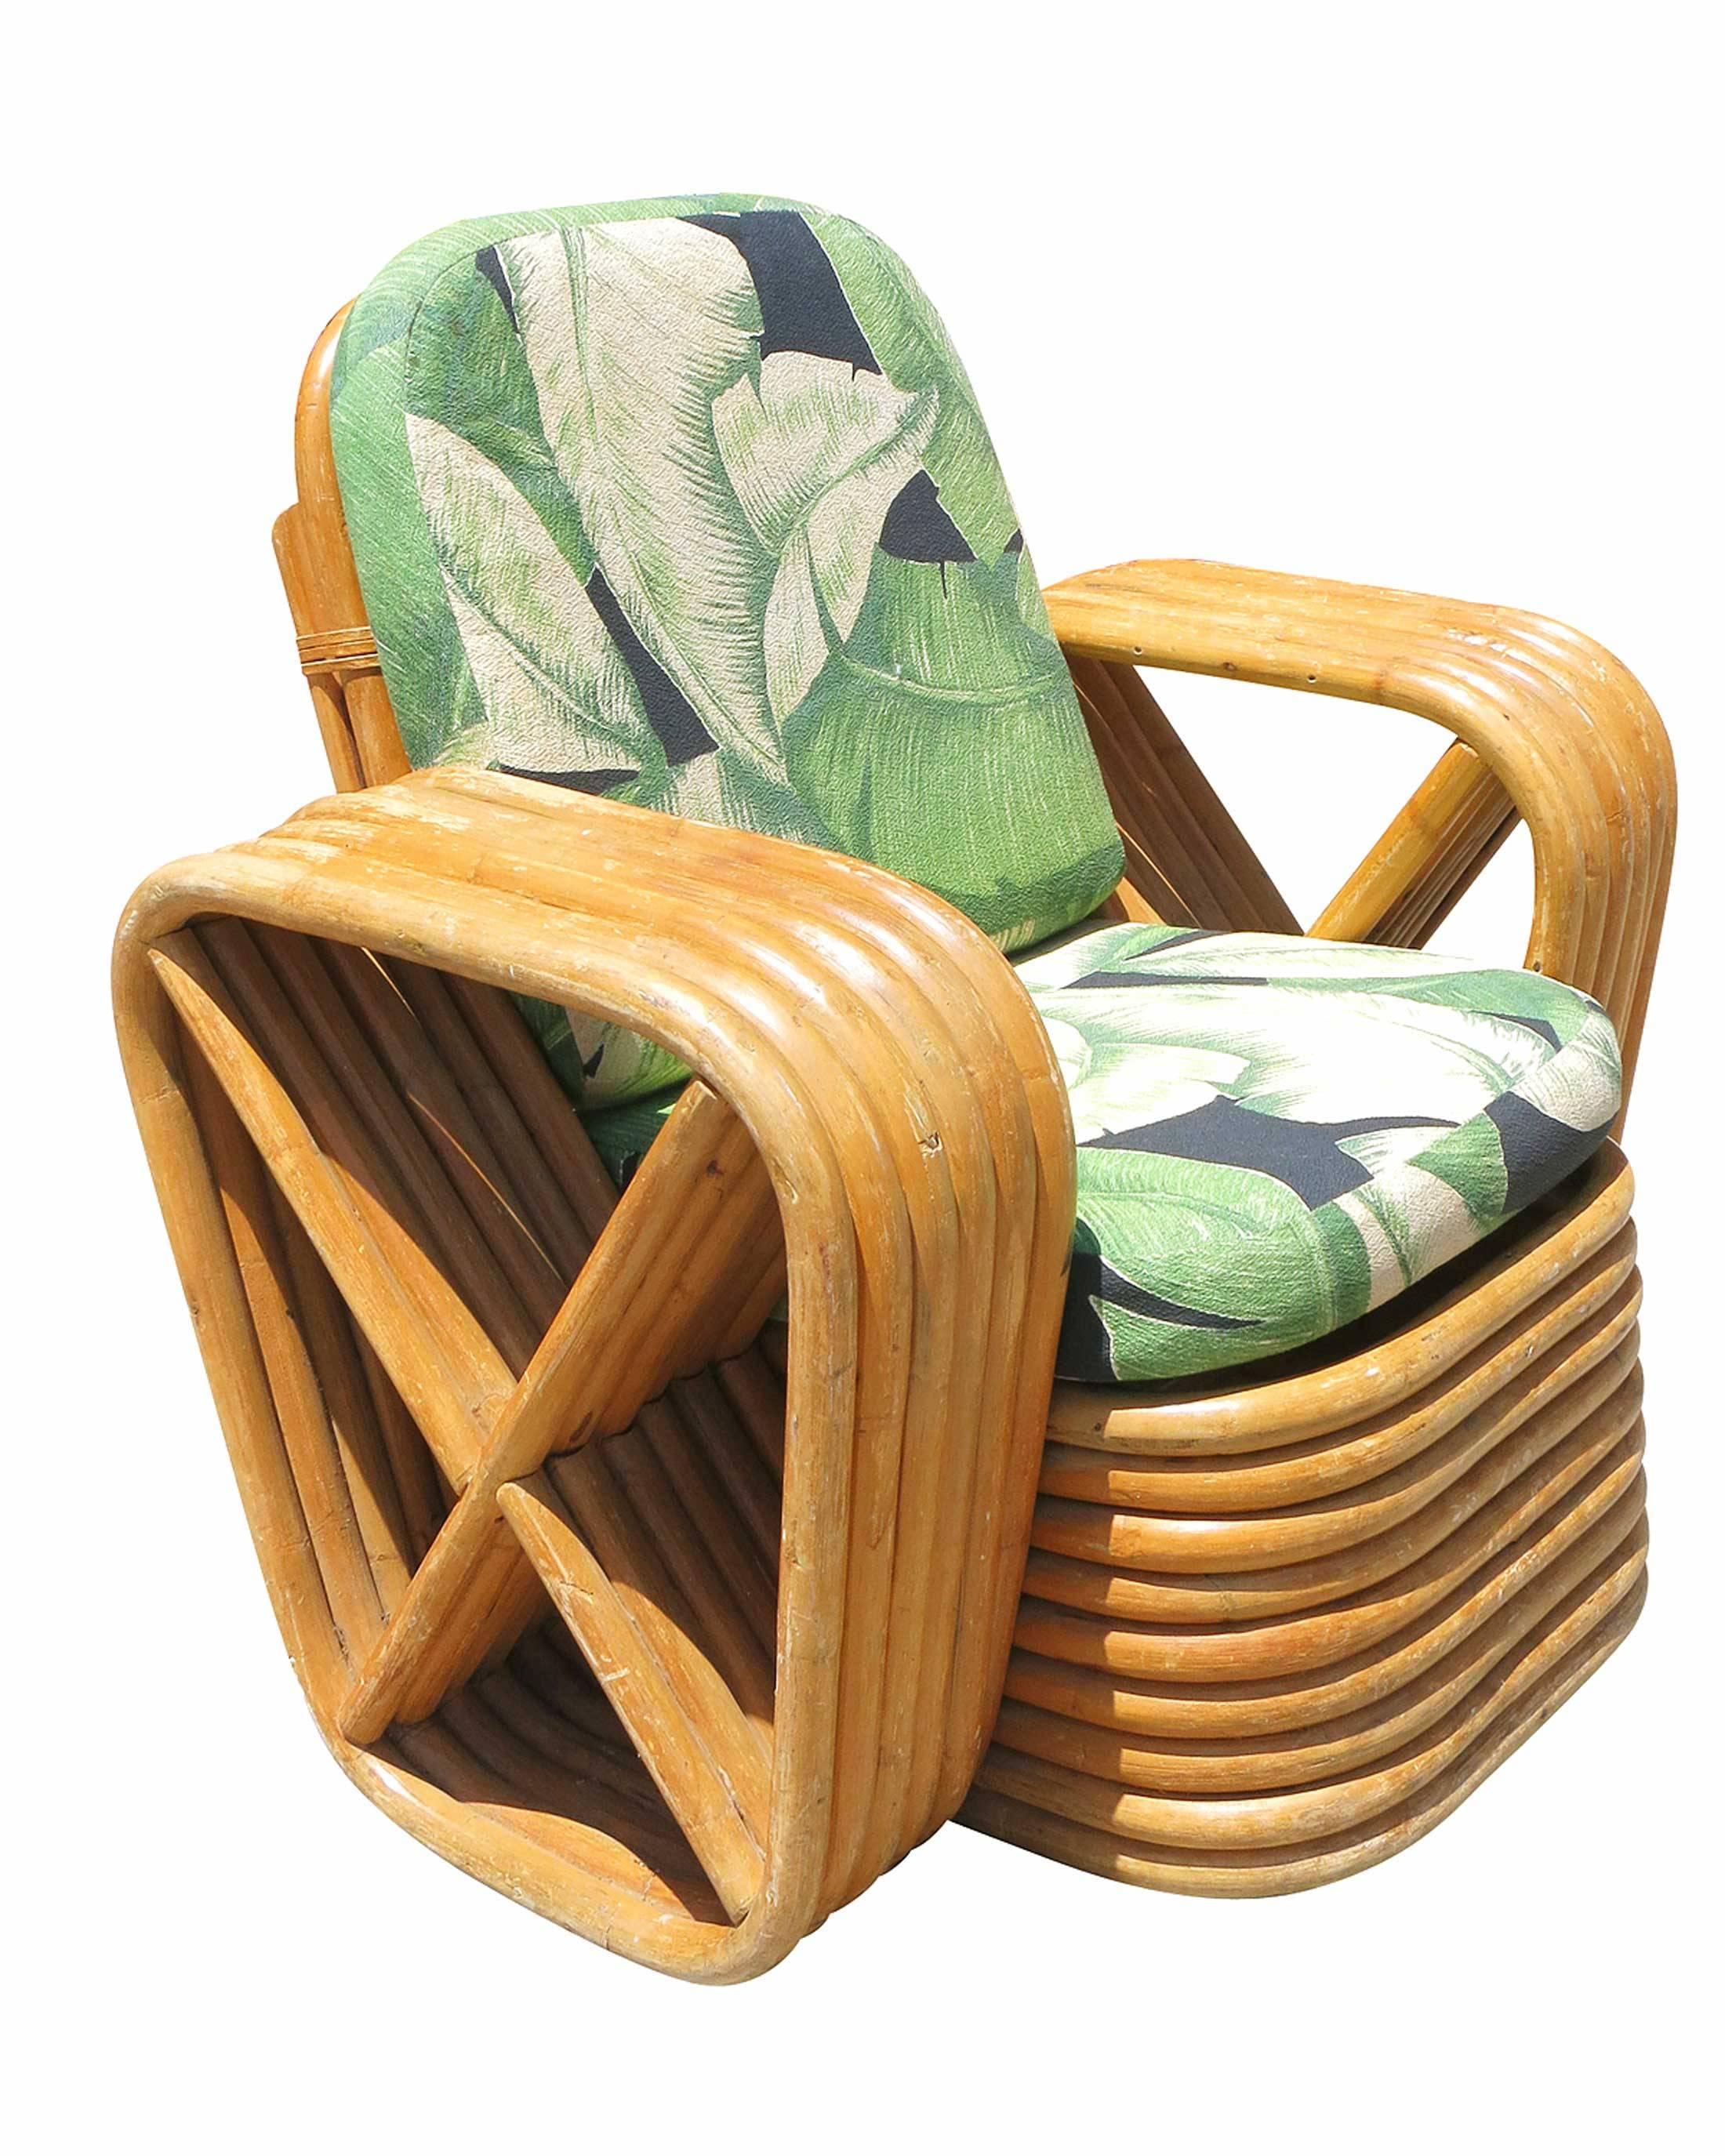 Child size Paul Frankl lounge chair, this chair features six-strand square pretzel arms with a Classic stacked base.


Custom cushions C.O.M. (Costumers Own Material) are included in the price. Simply supply the fabric and we have the cushions made